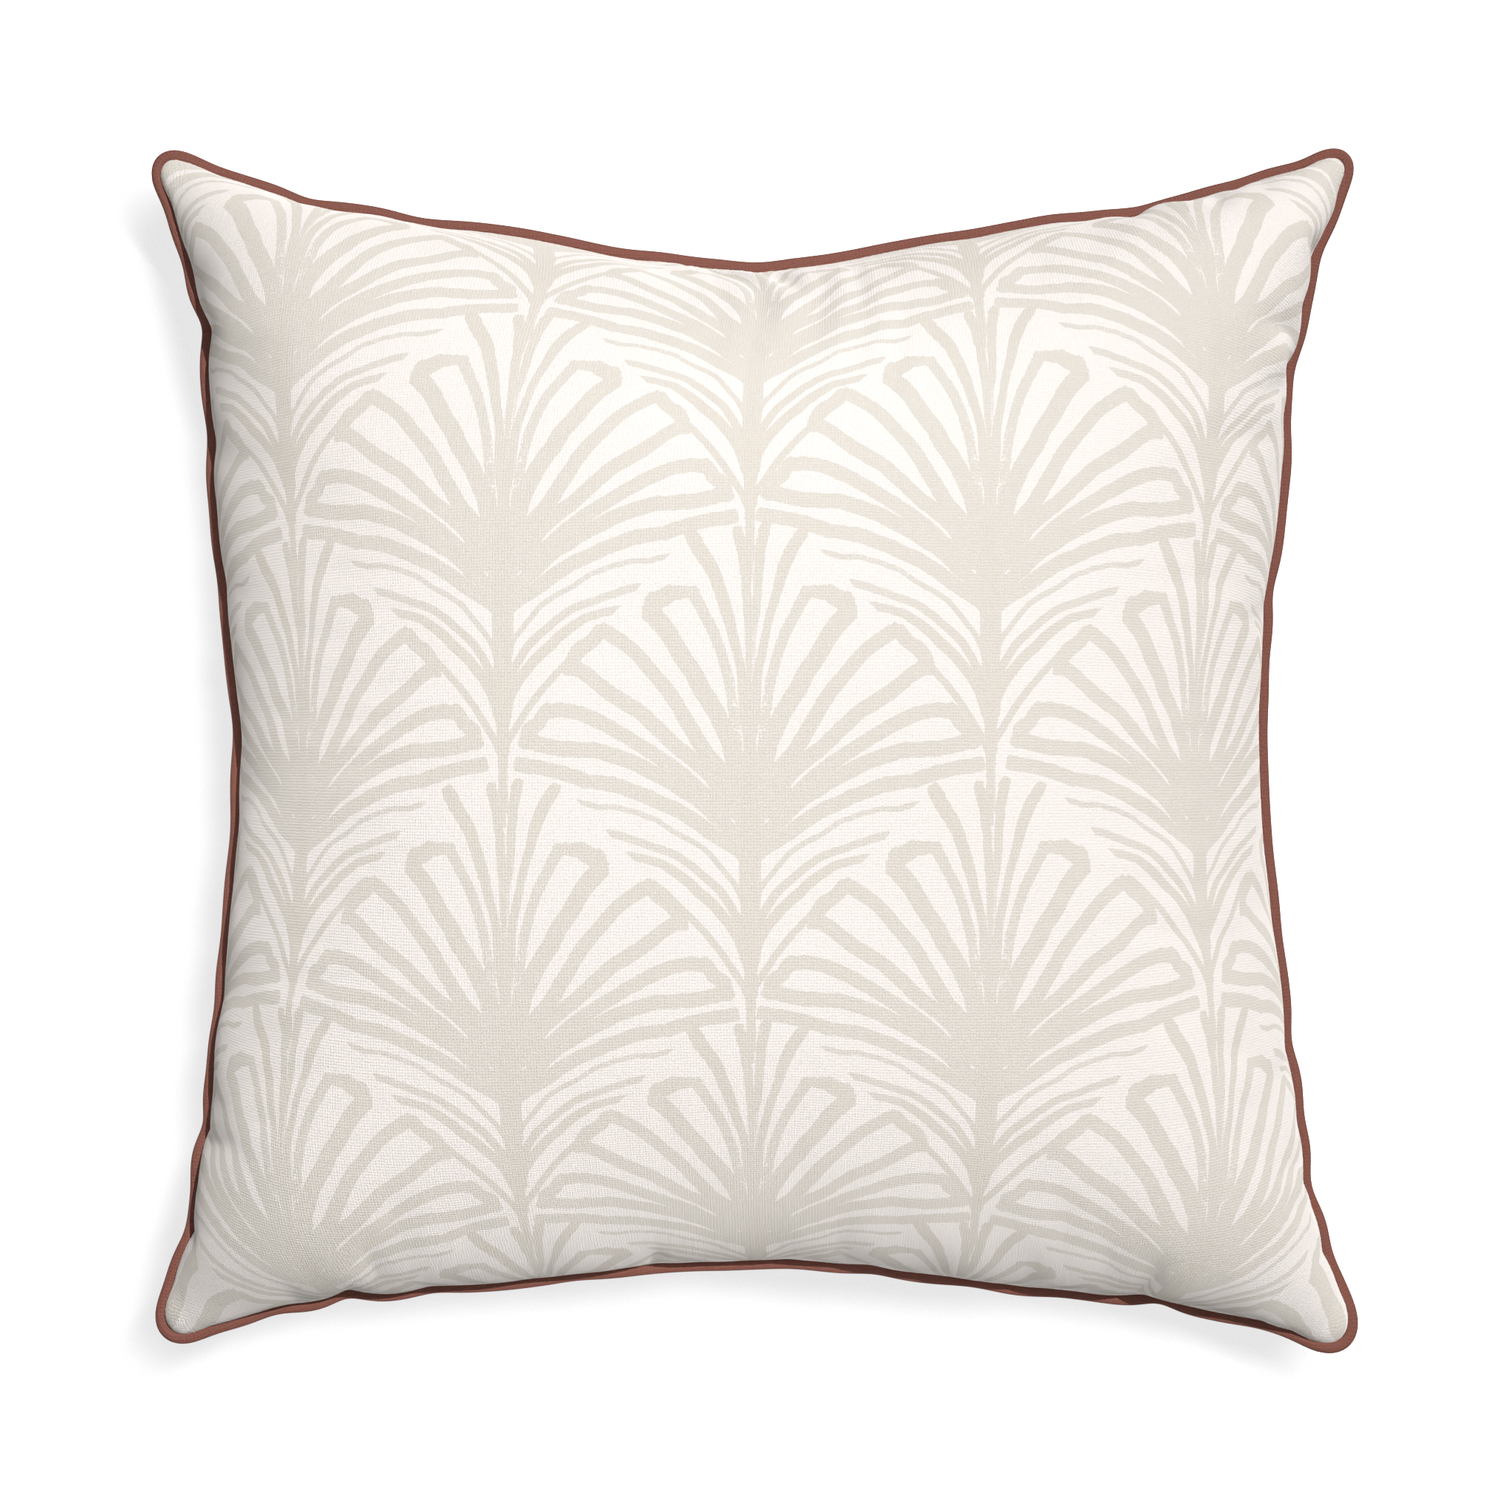 Euro-sham suzy sand custom pillow with w piping on white background